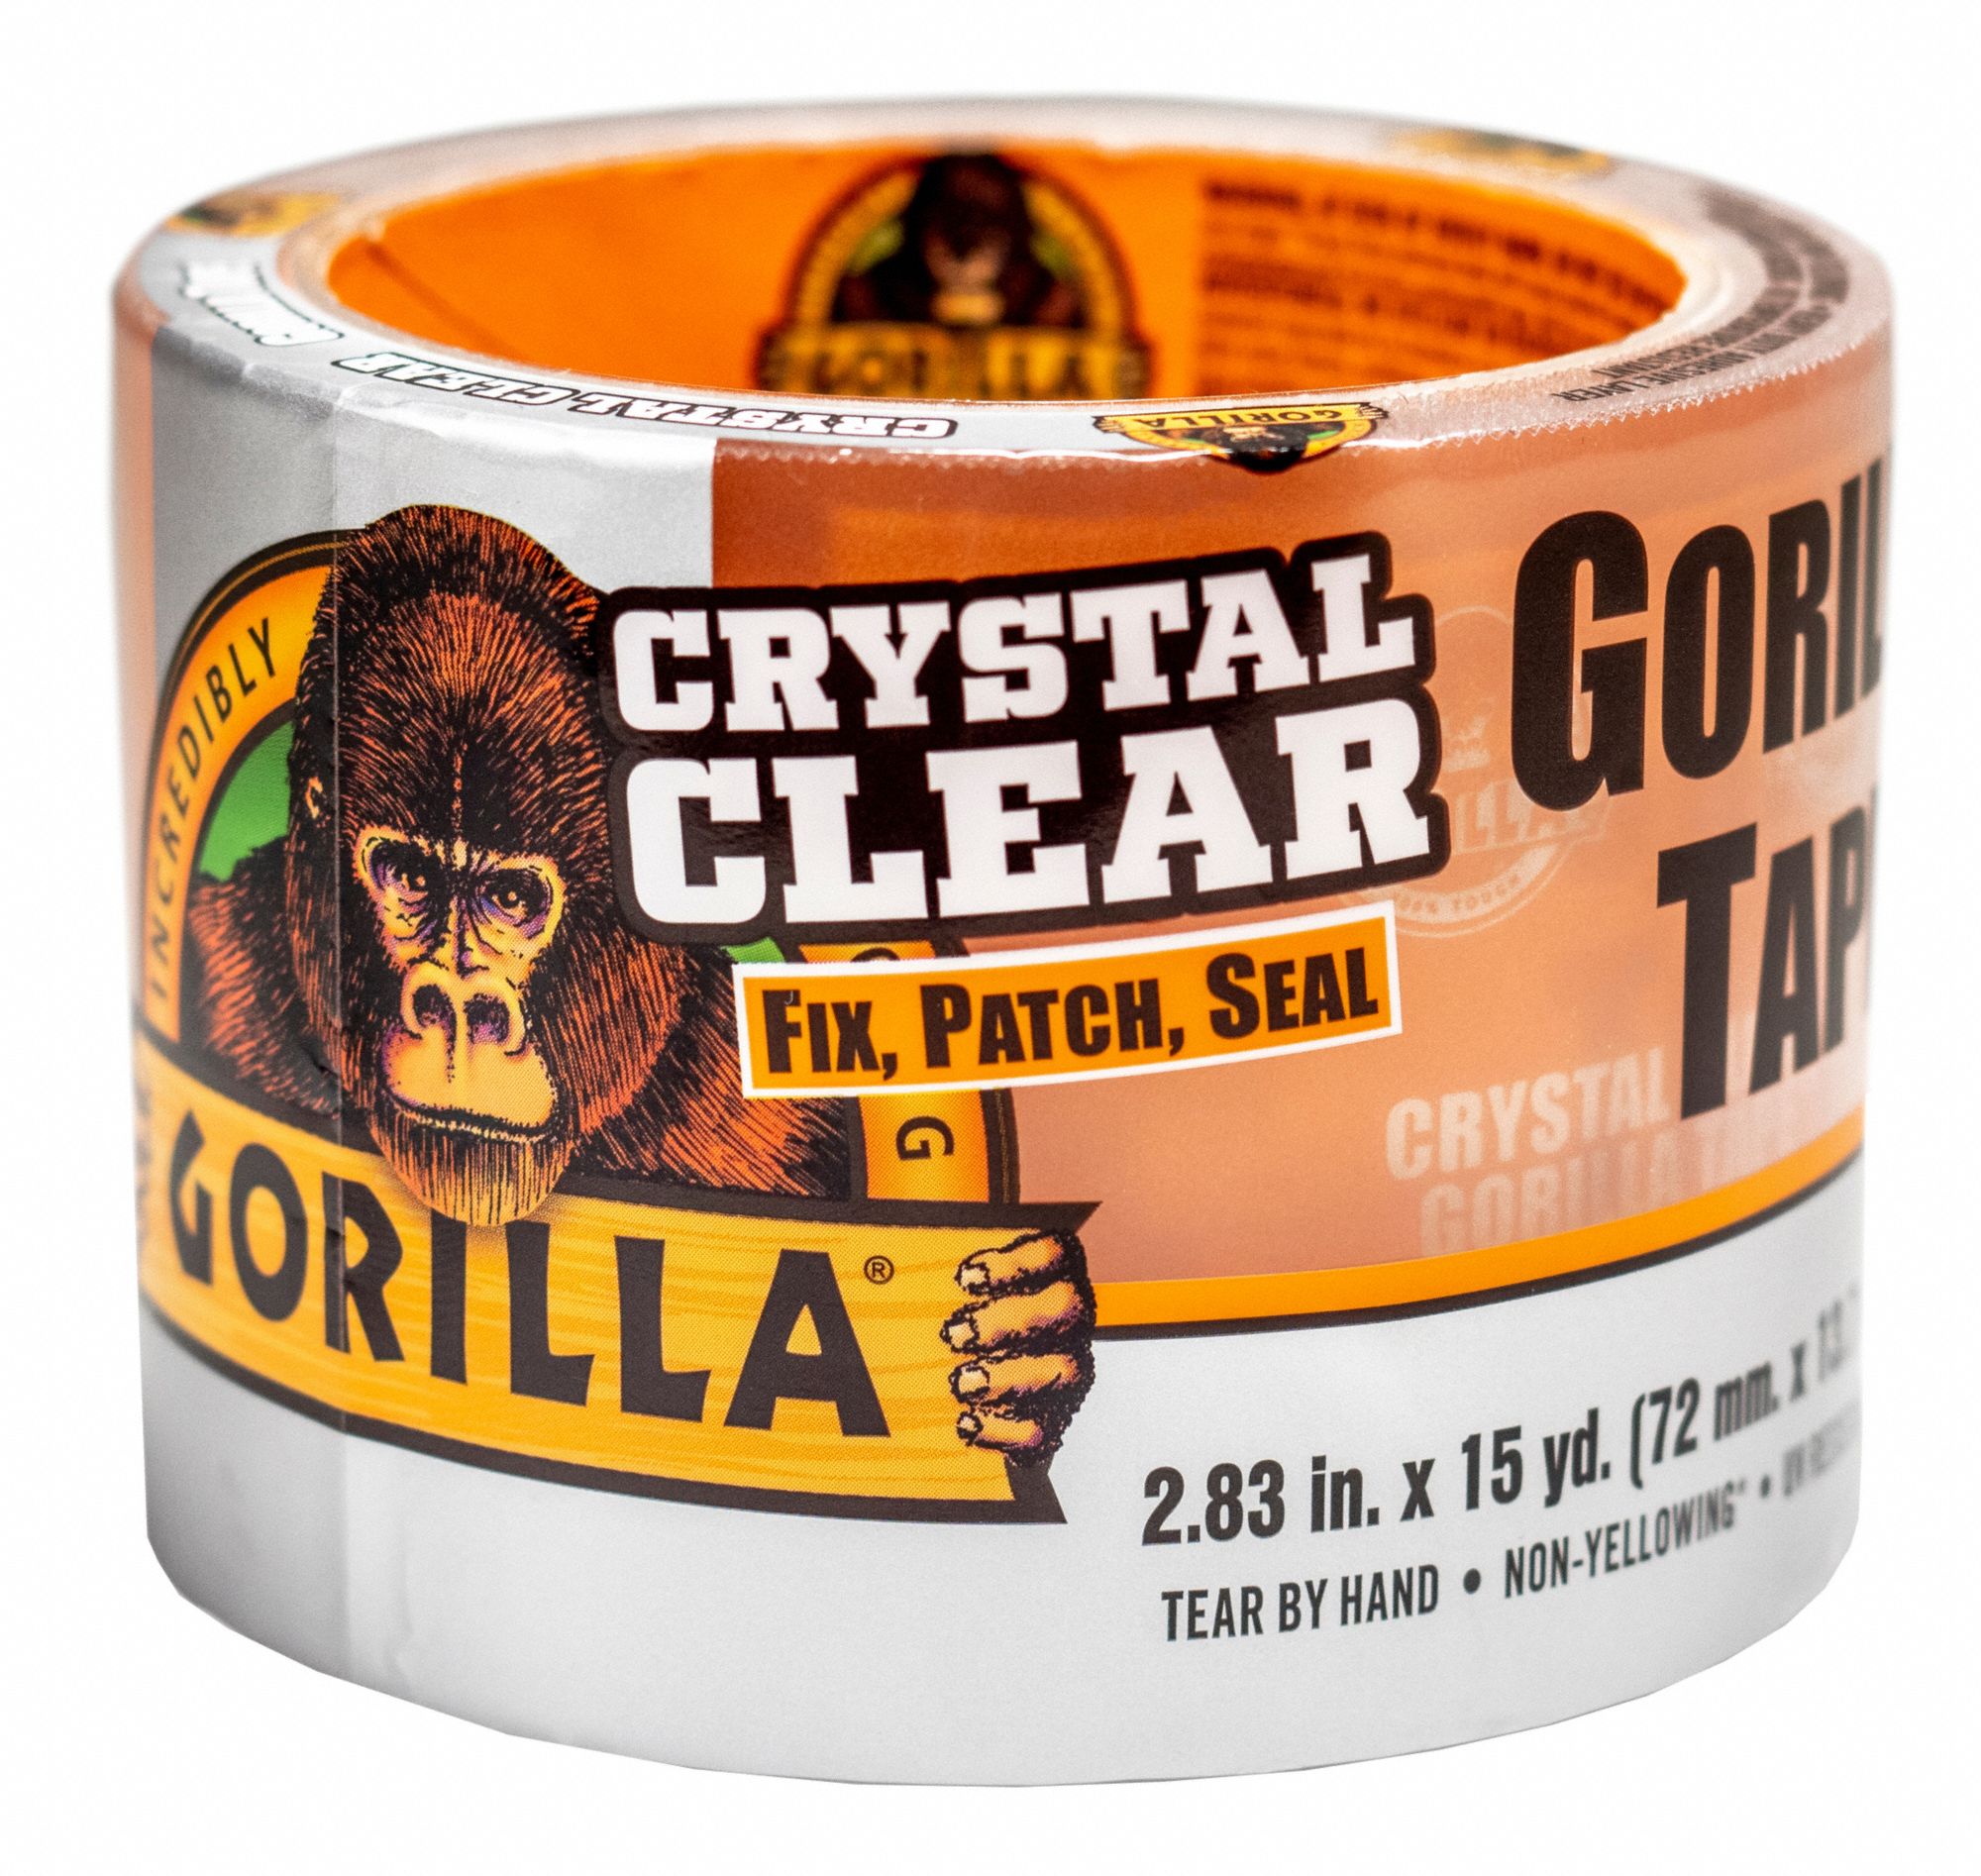 Repair Tape: Gorilla, Light Duty, 2 13/16 in x 15 yd, Transparent, Continuous Roll, Pack Qty: 1